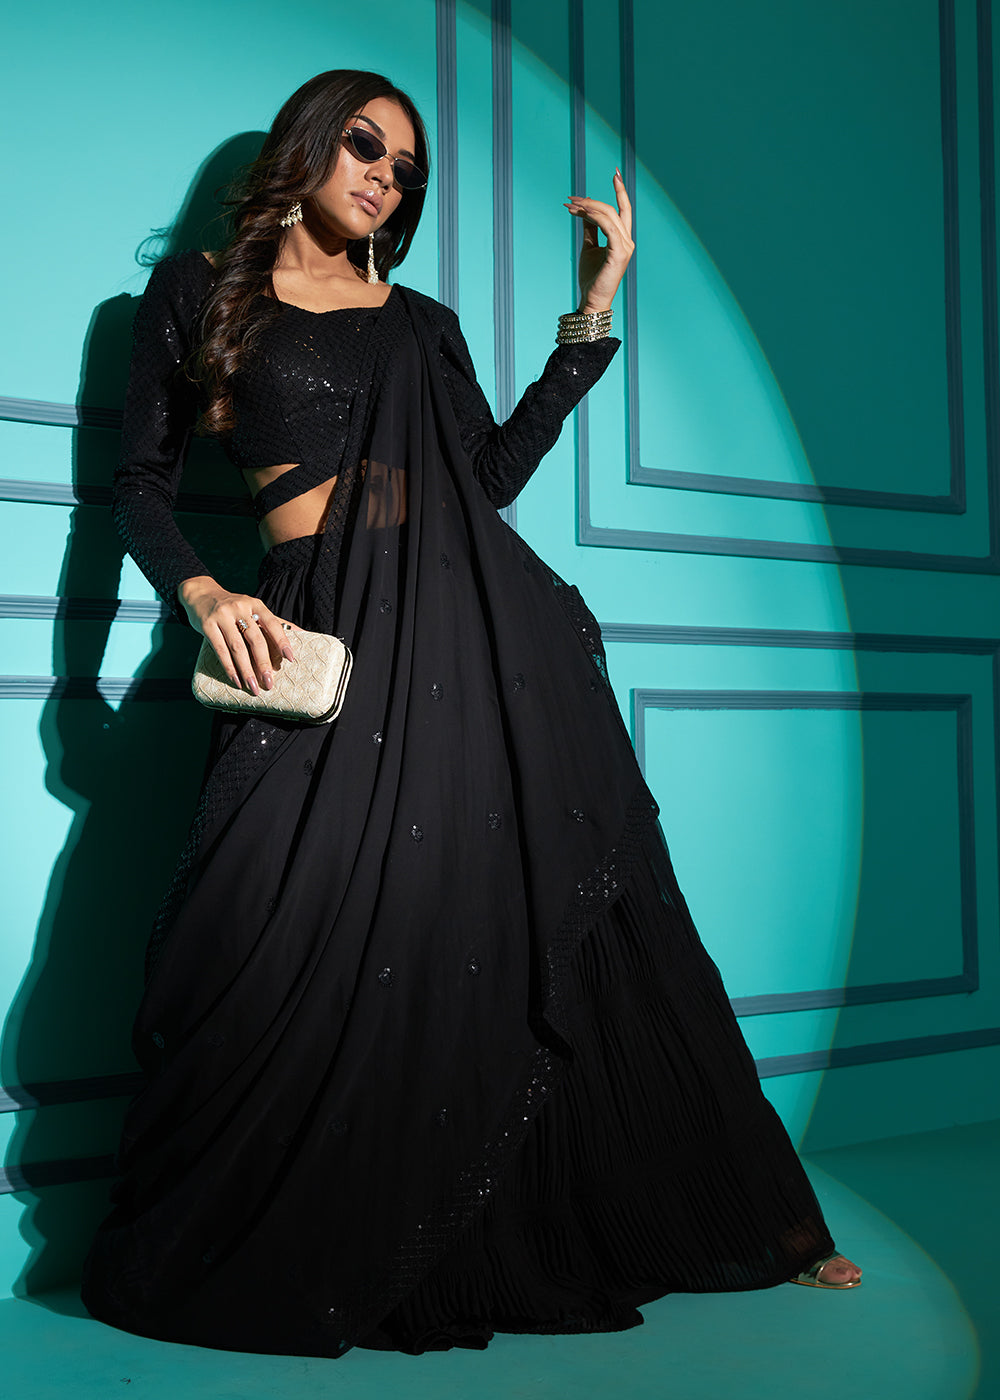 Buy Now Exquisite Black Georgette Wedding Party Lehenga Choli Online in USA, UK, Canada & Worldwide at Empress Clothing.